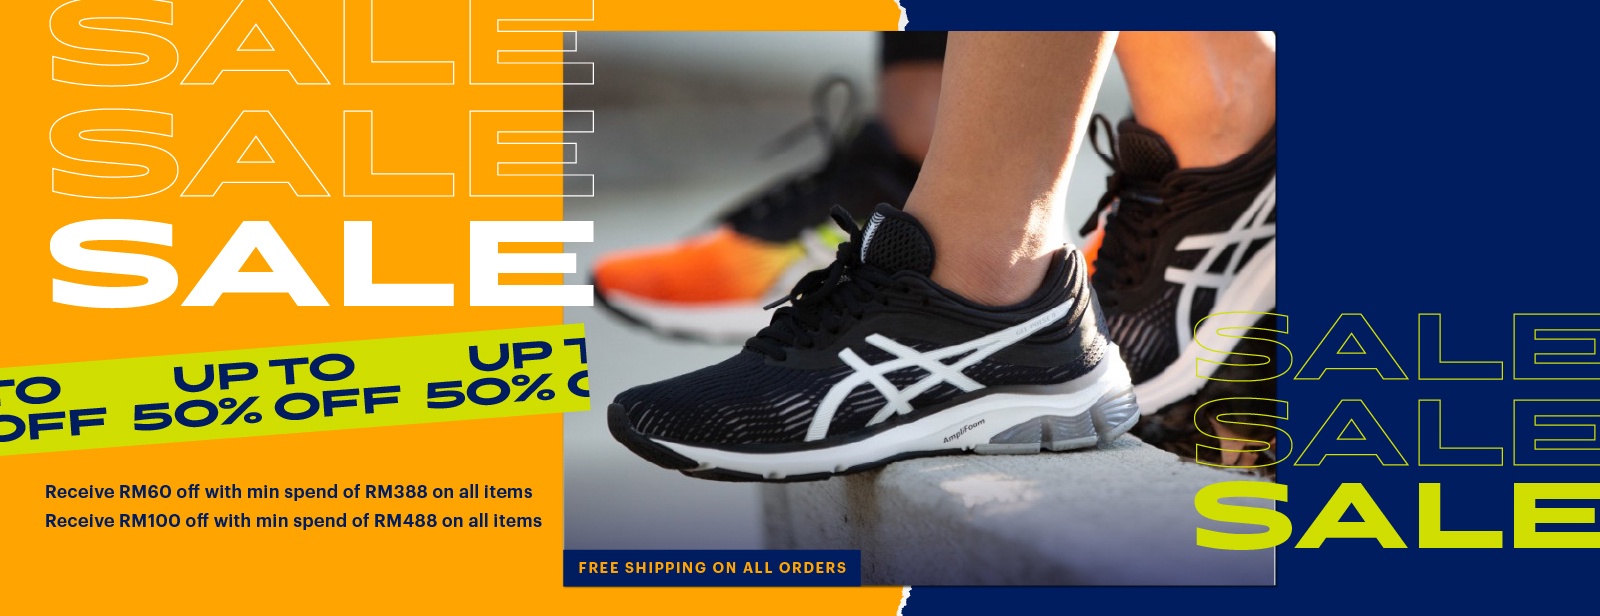 asics shoes sale, OFF 79%,Free Shipping